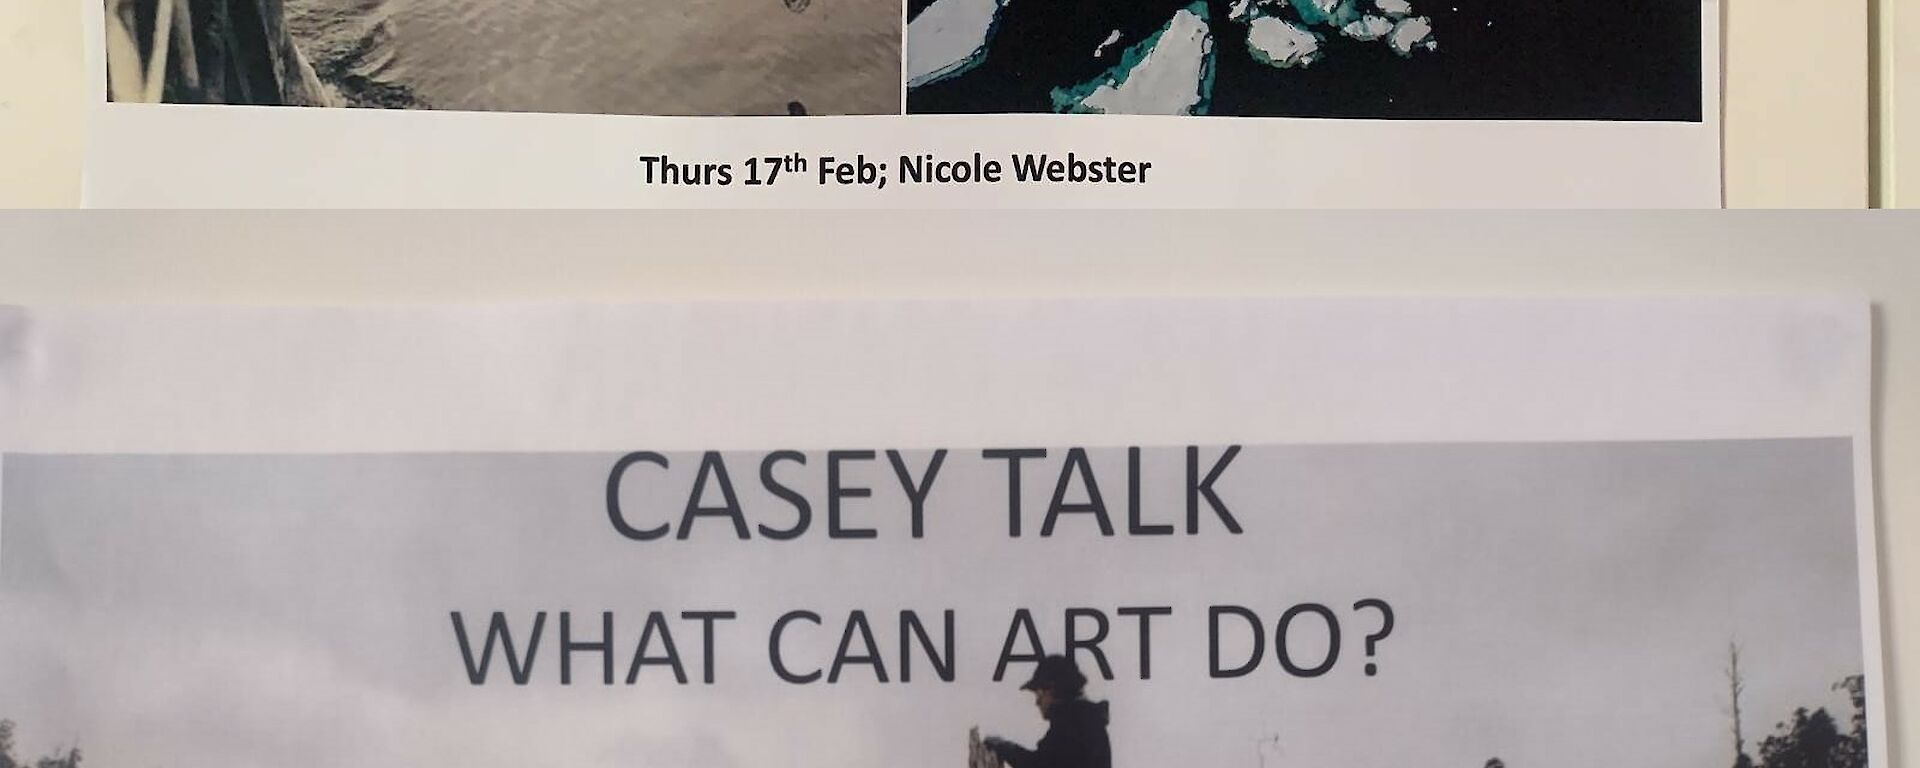 Two posters printed on A4 paper hung on a wall. The first features photos of ships in an icy Southern Ocean, with text: "Casey Talk: The Future of Antarctica's Marine Science - by Nicole Webster". The second poster features a photo of a person standing on the ruined stump of a large tree in a forest logging area, with text: "Casey Talk - What Can Art Do? - by Janet Laurence"